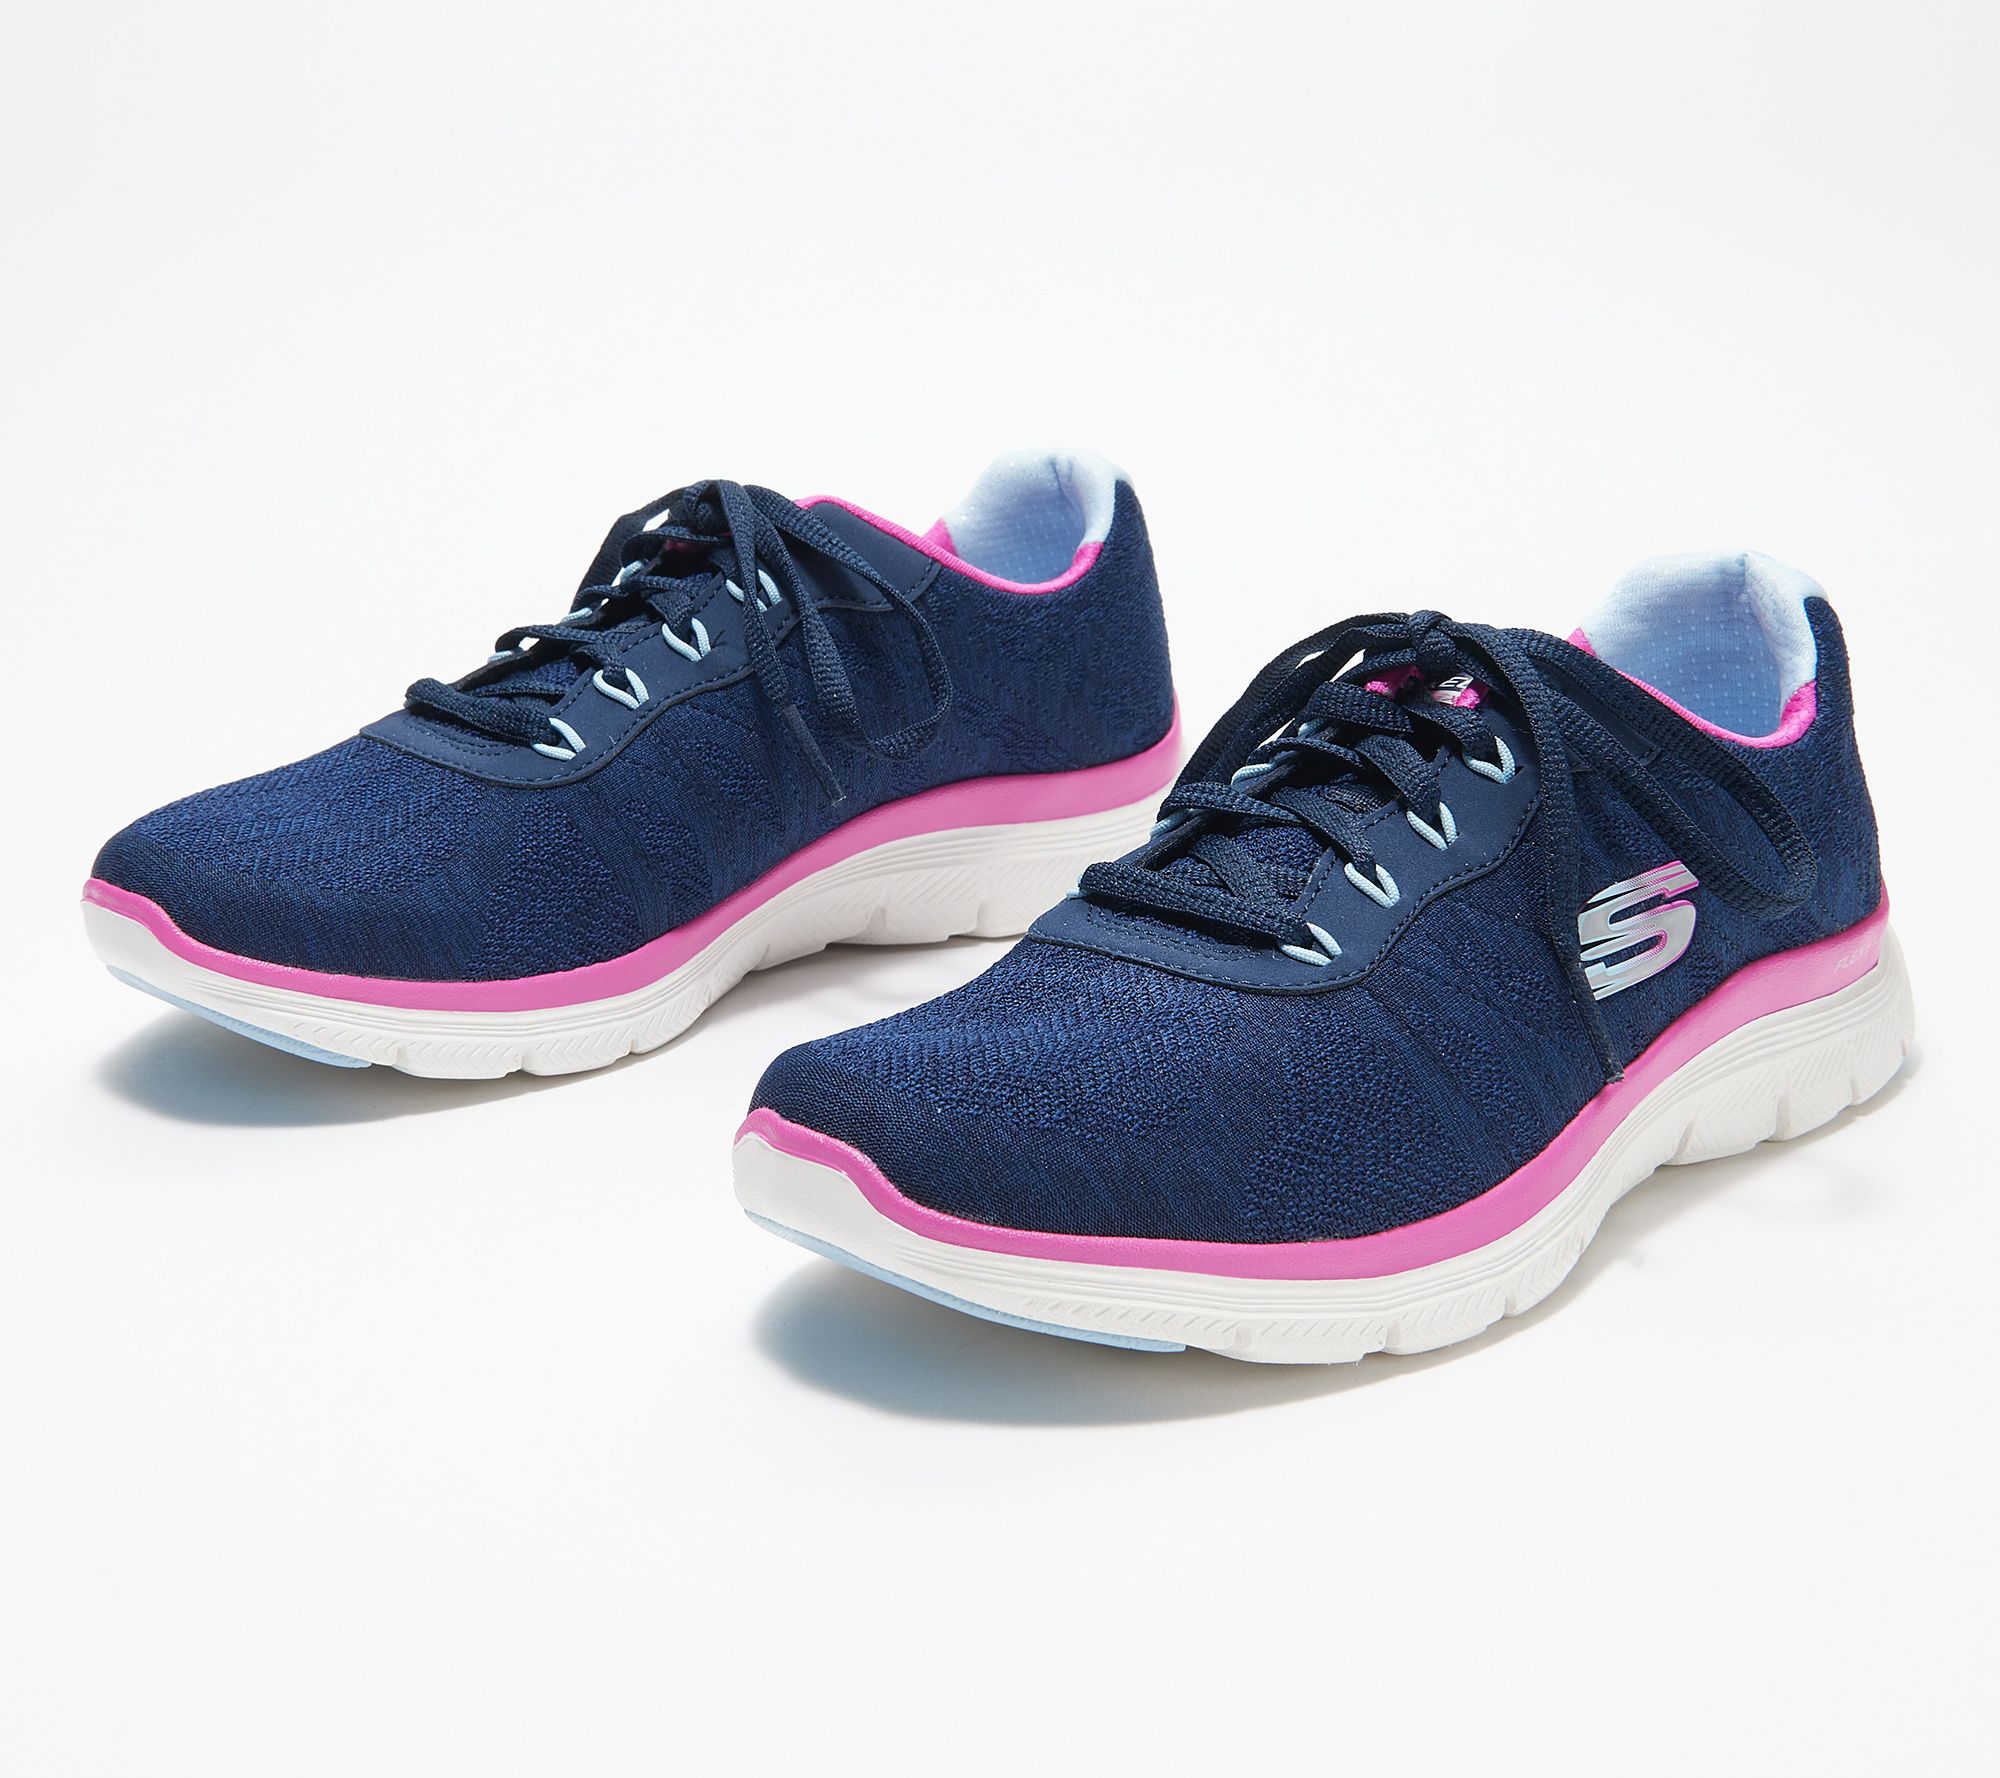 As Is" Skechers Washable Flex 4.0 Lace Up Sneakers - QVC.com